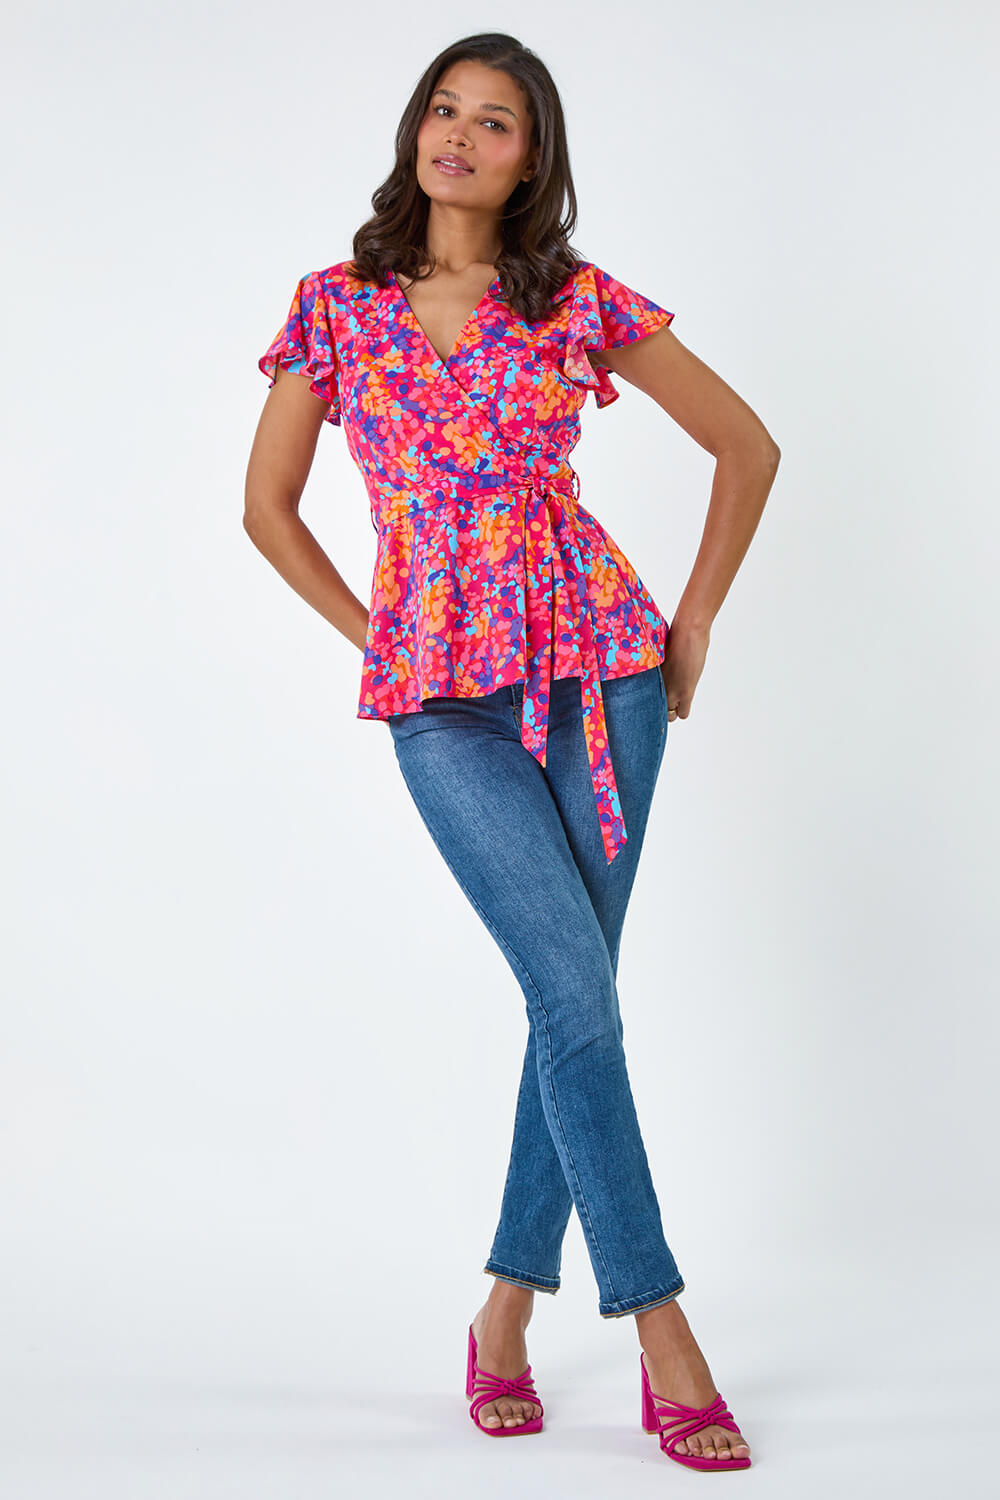 PINK Floral Print Frill Detail Top, Image 2 of 5